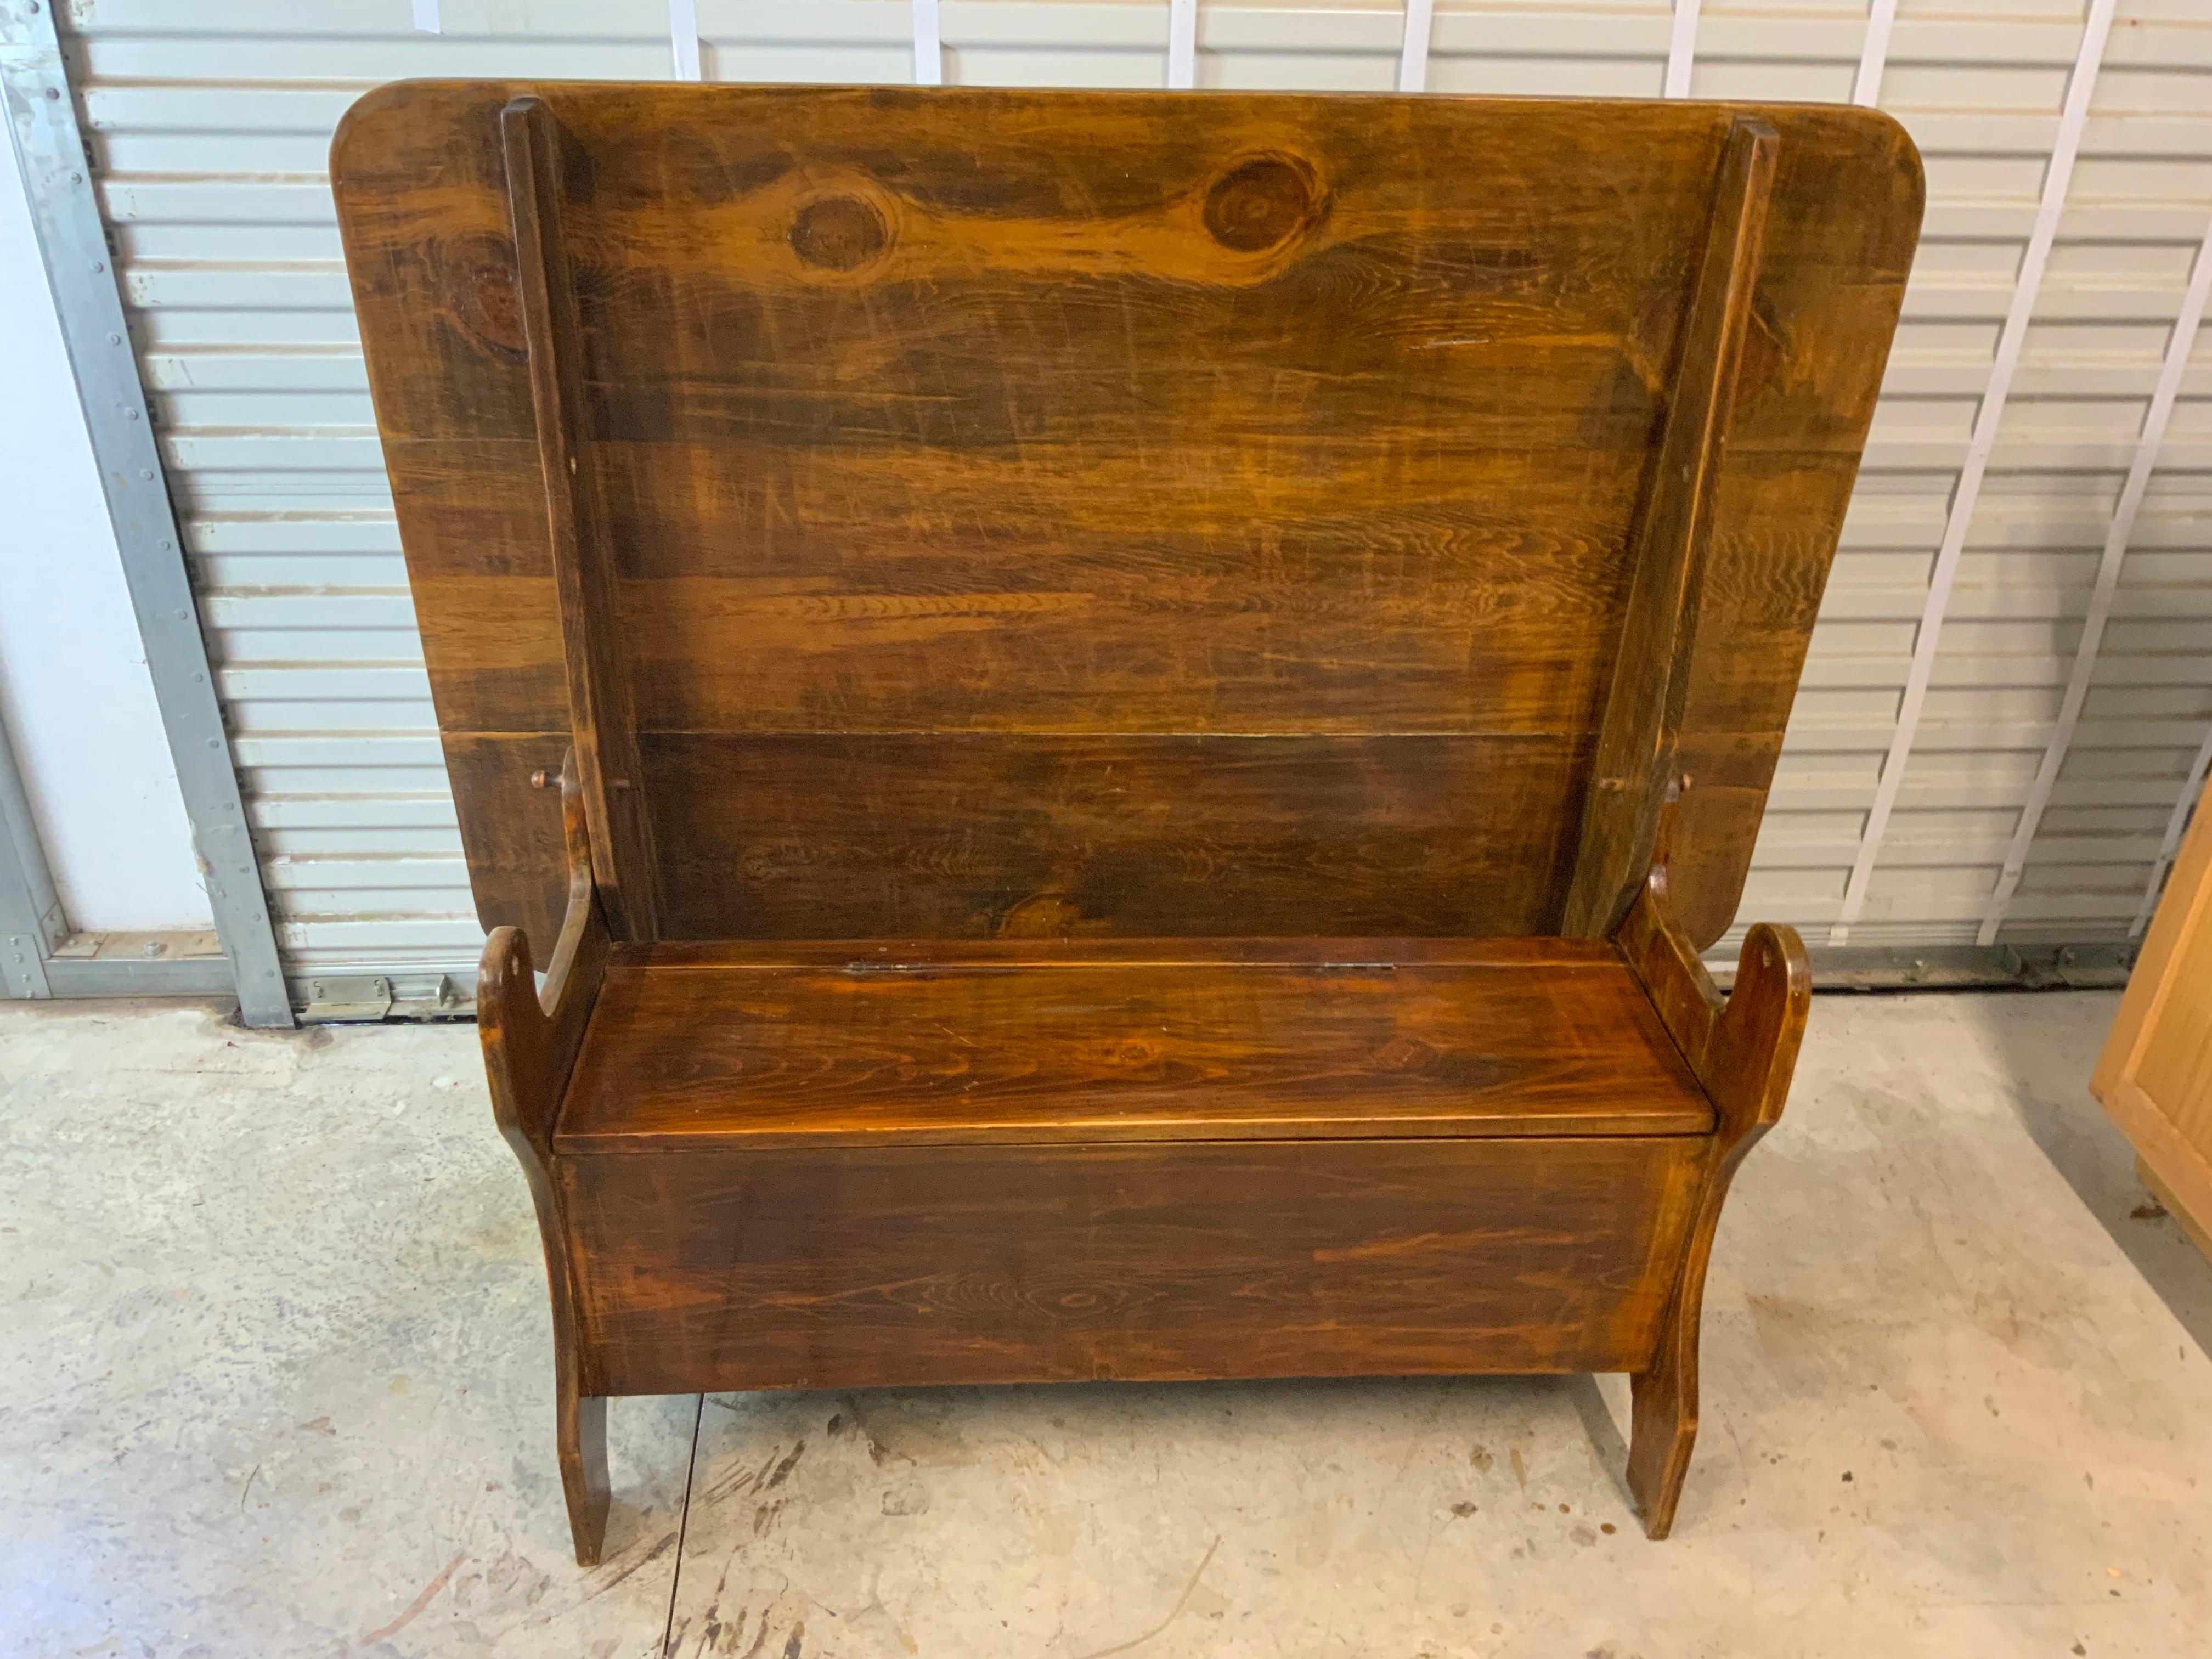 A very nice Primitive hutch table made of Pine with a three board top and a bench seat with a storage area. Looks to be made around late 1800s or early 1900s. Traces of old yellow - green paint in some areas on an older refinish surface. The pegs